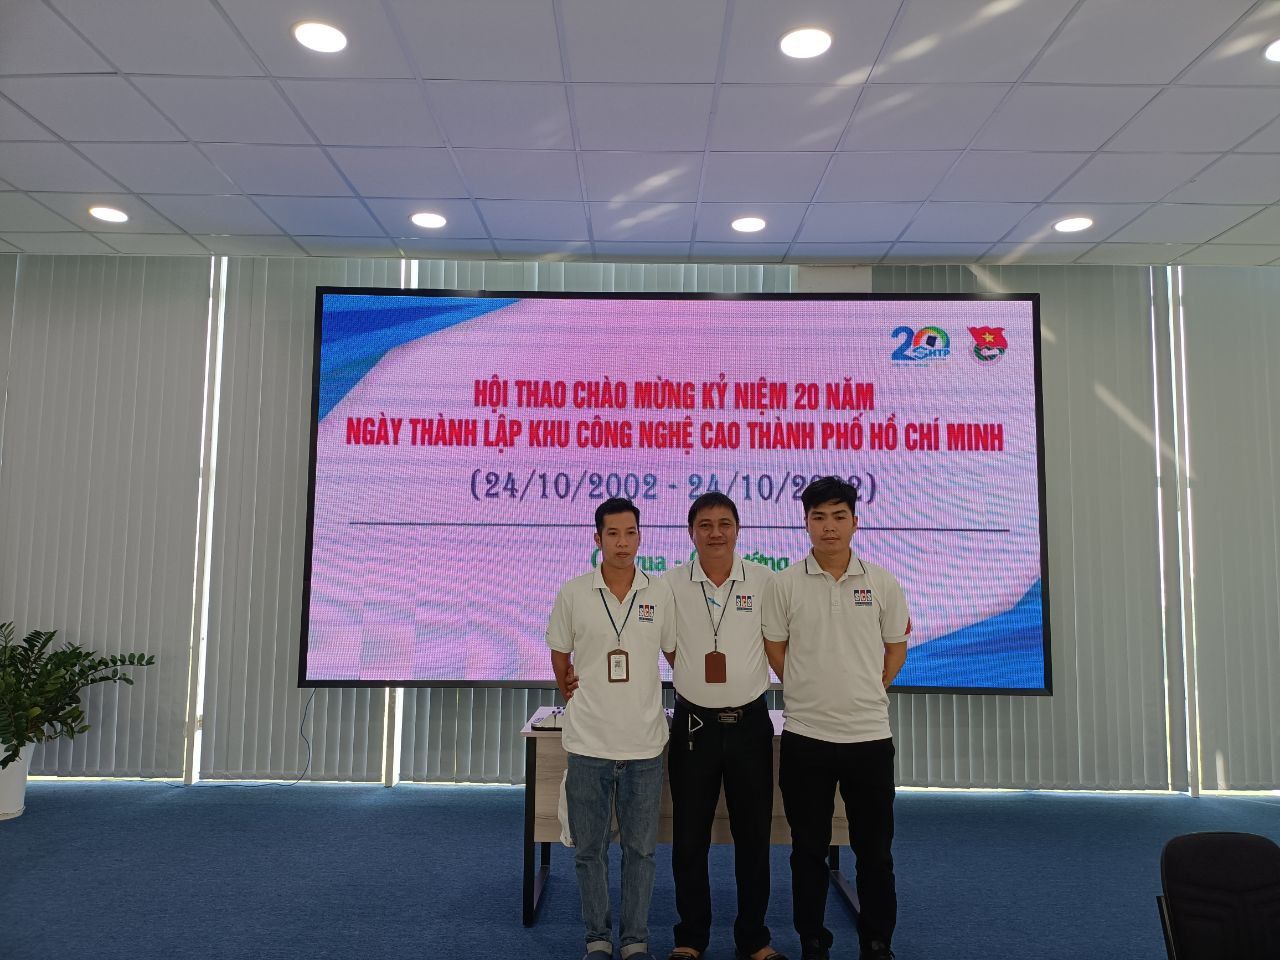 SCS attended the Sports Festival to celebrate the 20th anniversary of the establishment of Saigon High-Tech Park (October 24th, 2002 - October 24th, 2022)